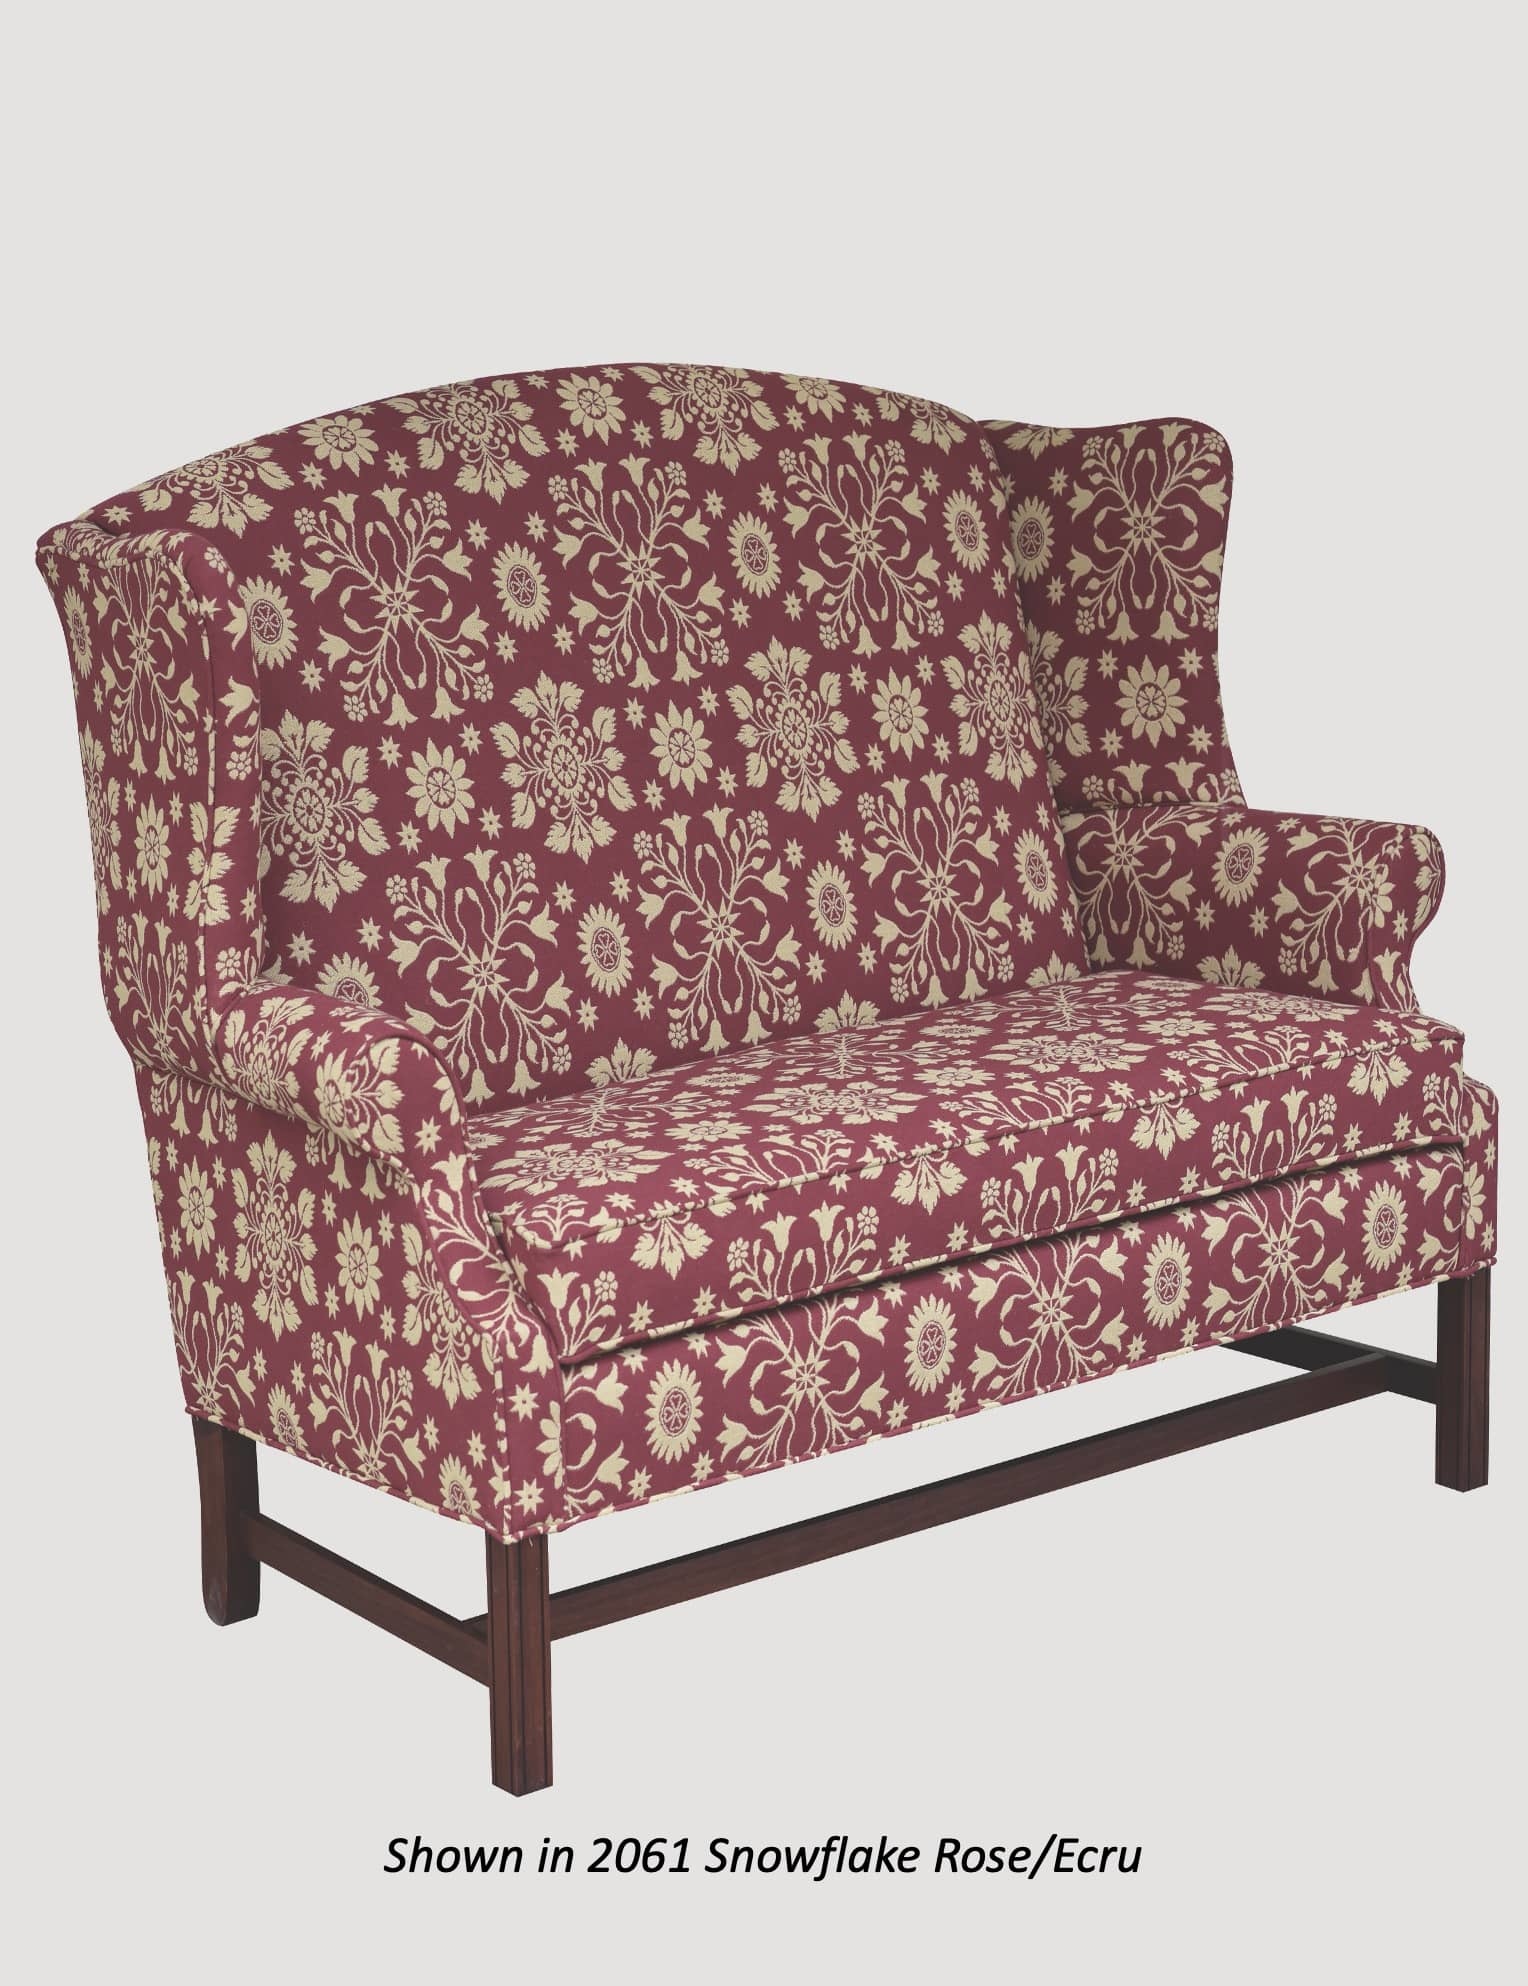 Town & Country Furnishings Stony Fork Settle - 60" Brand: Town & Country Furnishings